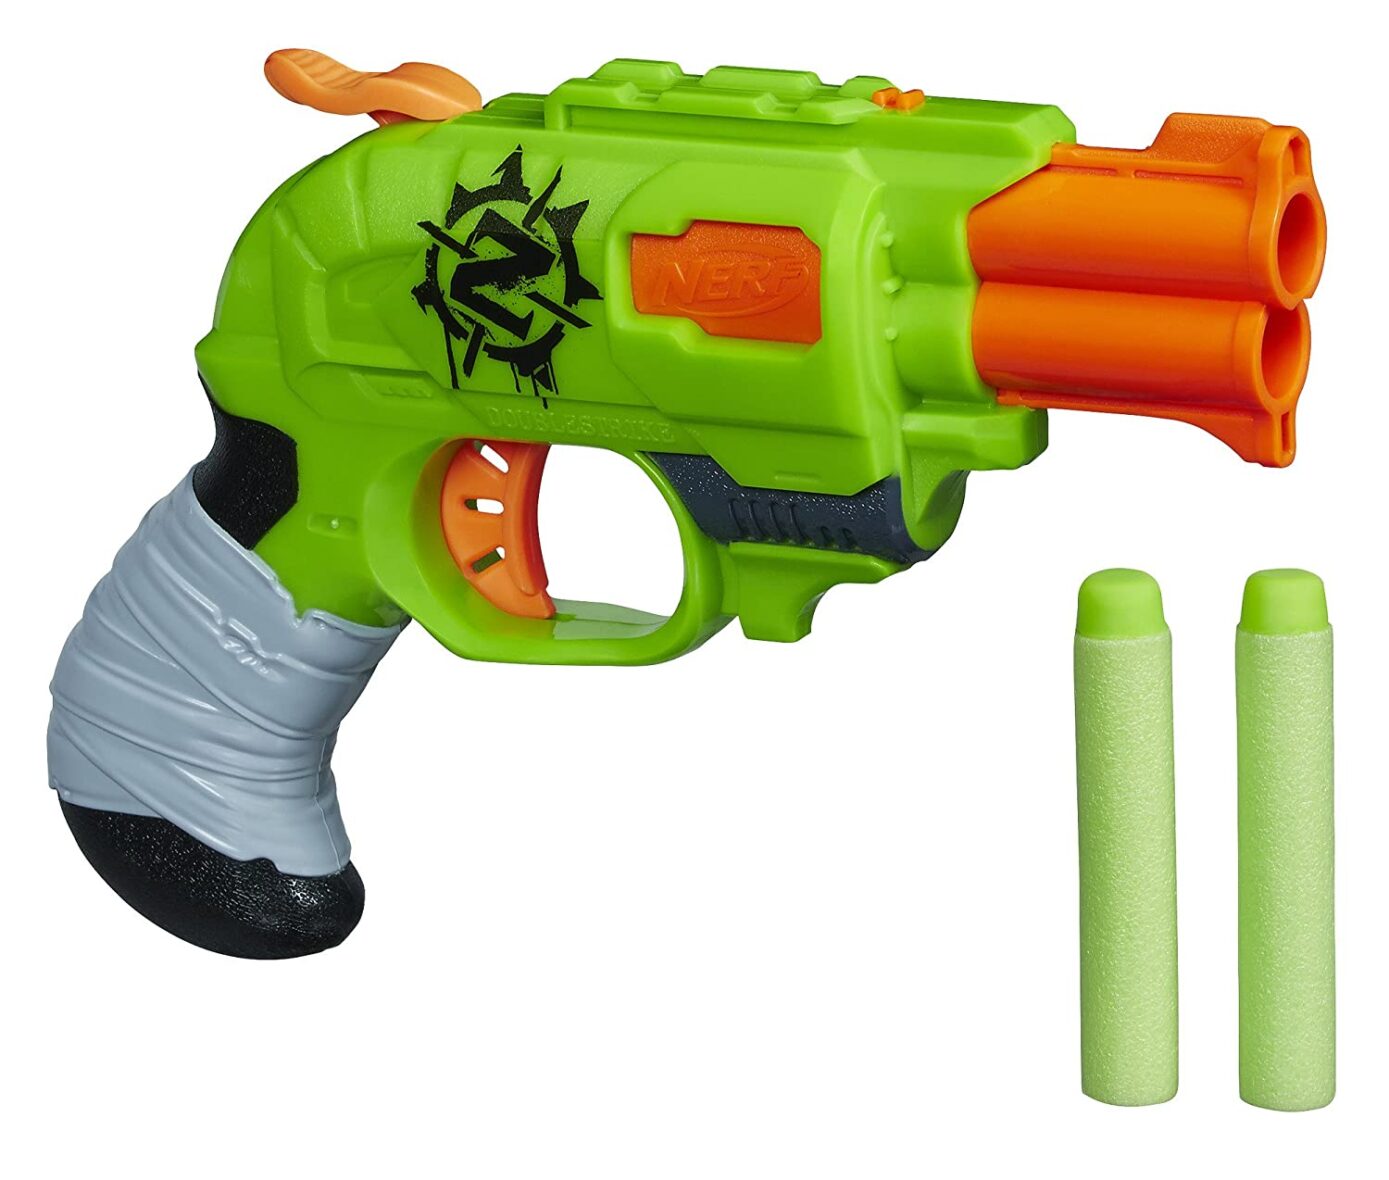 NERF Zombie Strike DoubleStrike (Multicolor) Includes 2 darts, For Kids Ages 8 and Up,Plastic